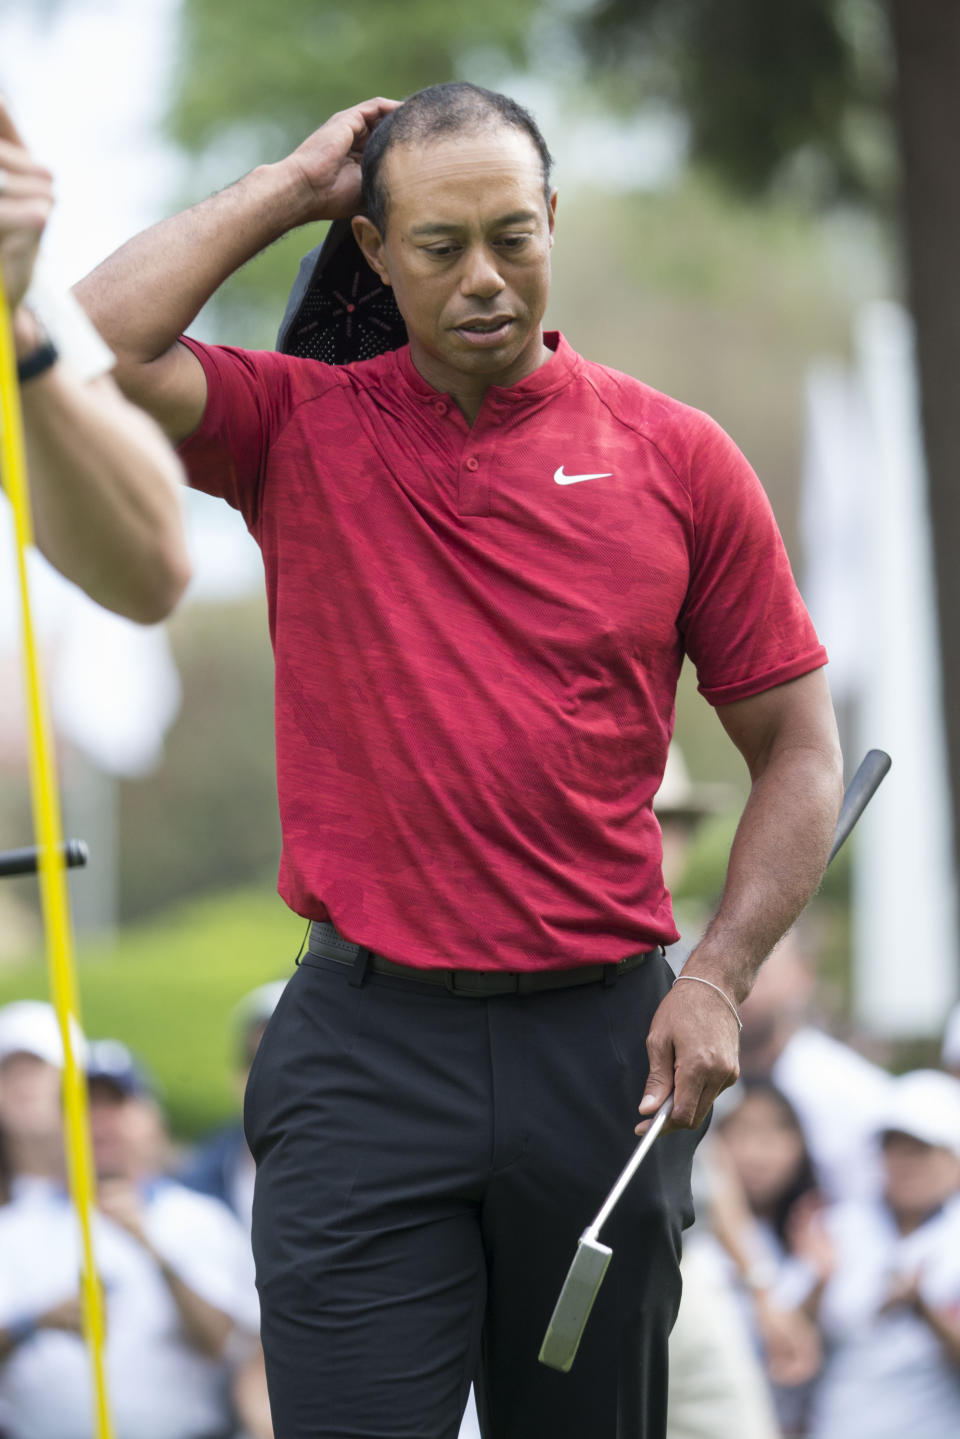 U.S. golfer Tiger Woods adjusts his hat at the end of the Mexico Championship at Chapultepec Golf Club in Mexico City, Sunday, Feb. 24, 2019. Woods got his first top 10 of the year at the tournament. (AP Photo/Christian Palma)